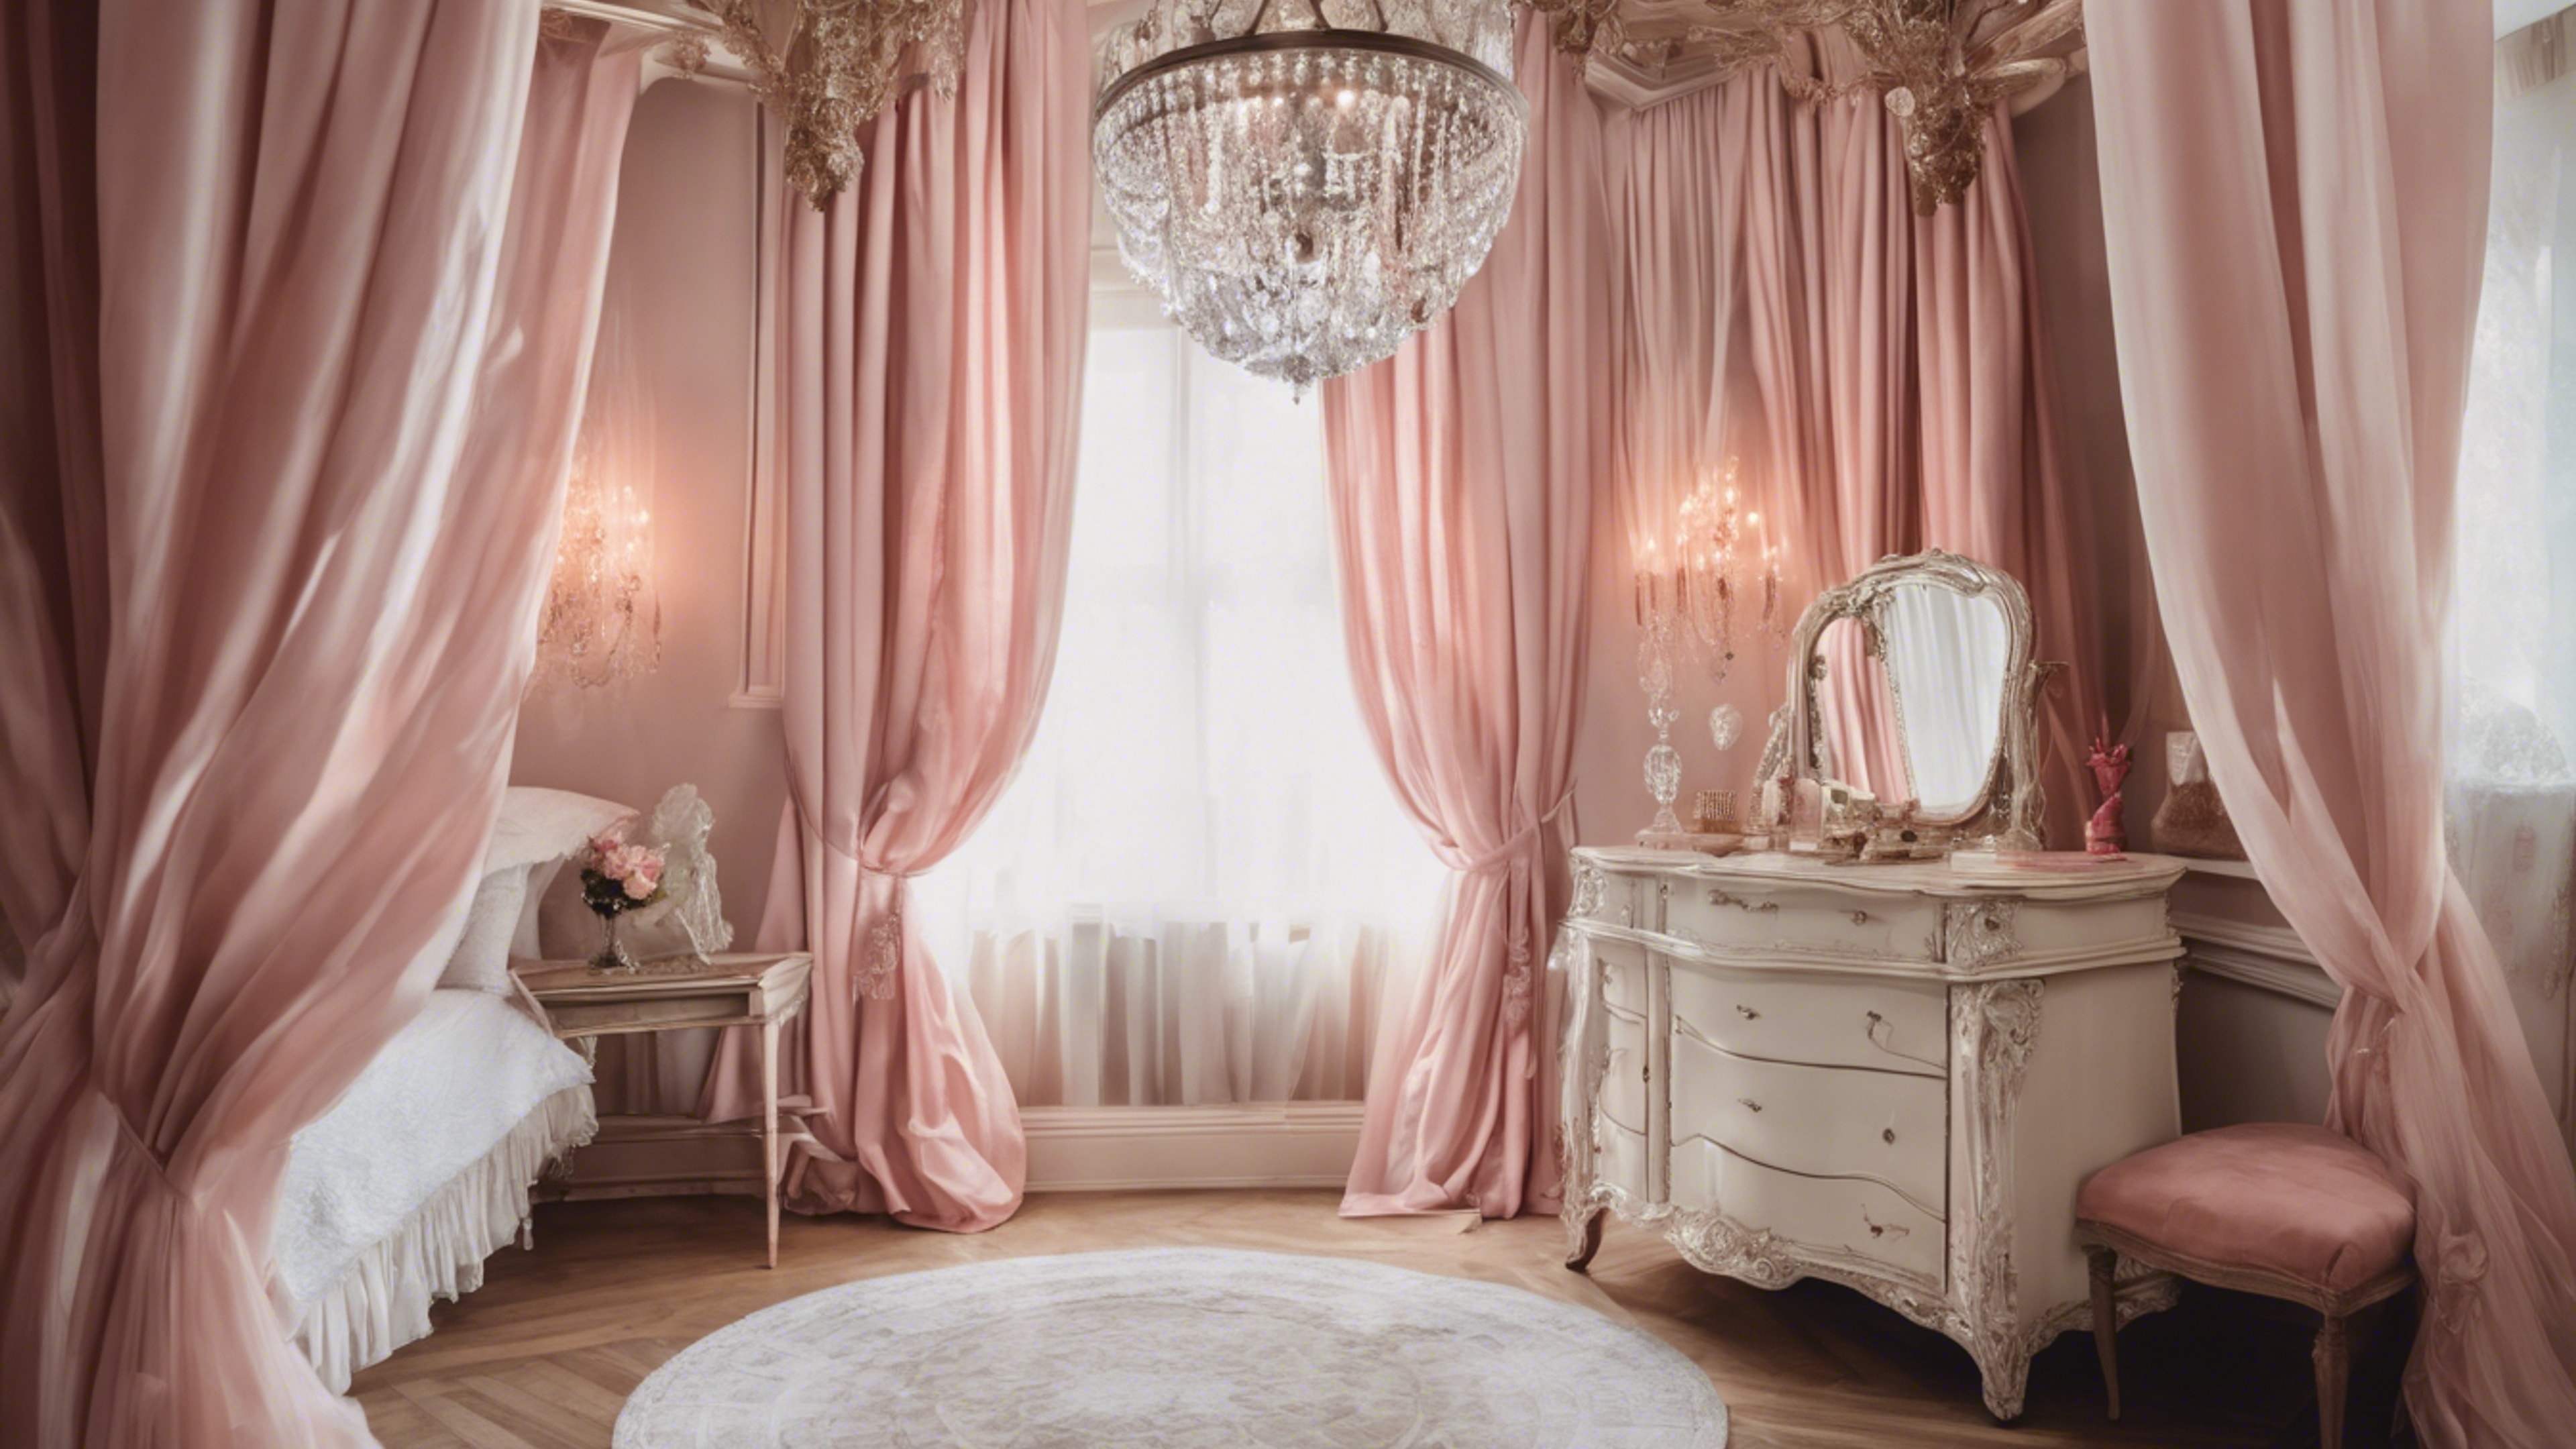 A feminine French bedroom, with canopy bed draped in soft-pink curtains, crystal chandelier hanging overhead, and an elegant antique vanity. Tapeta[9a96ceac1df24dd59ae9]